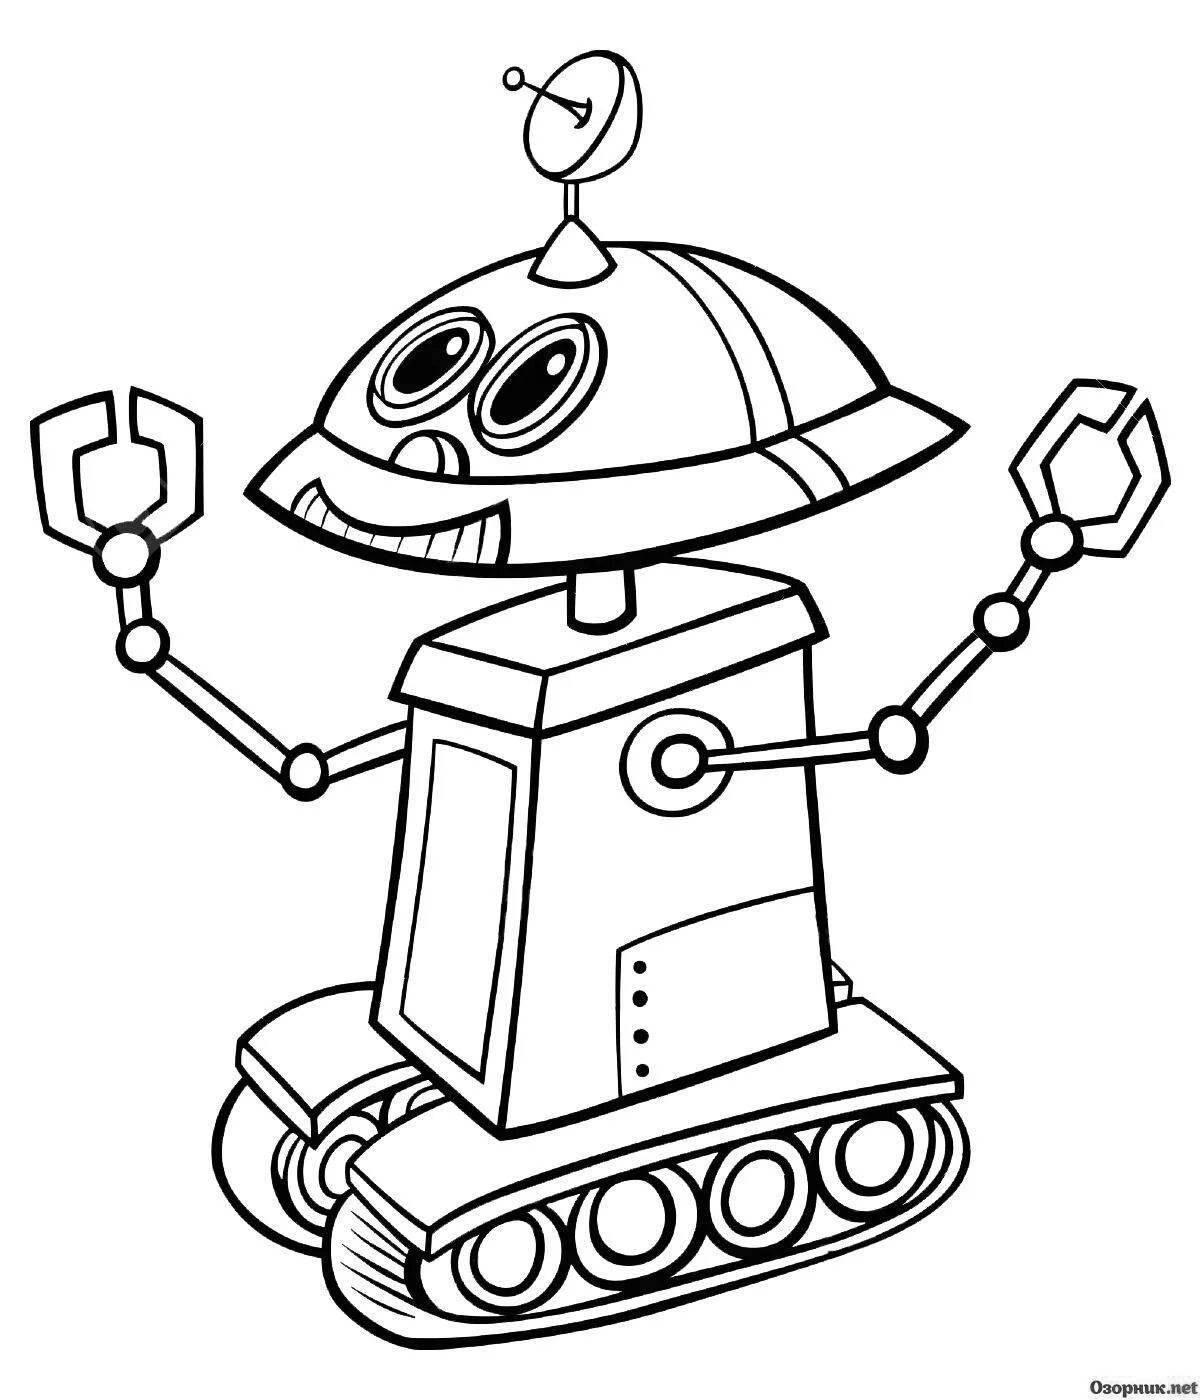 Charming moon rover coloring page